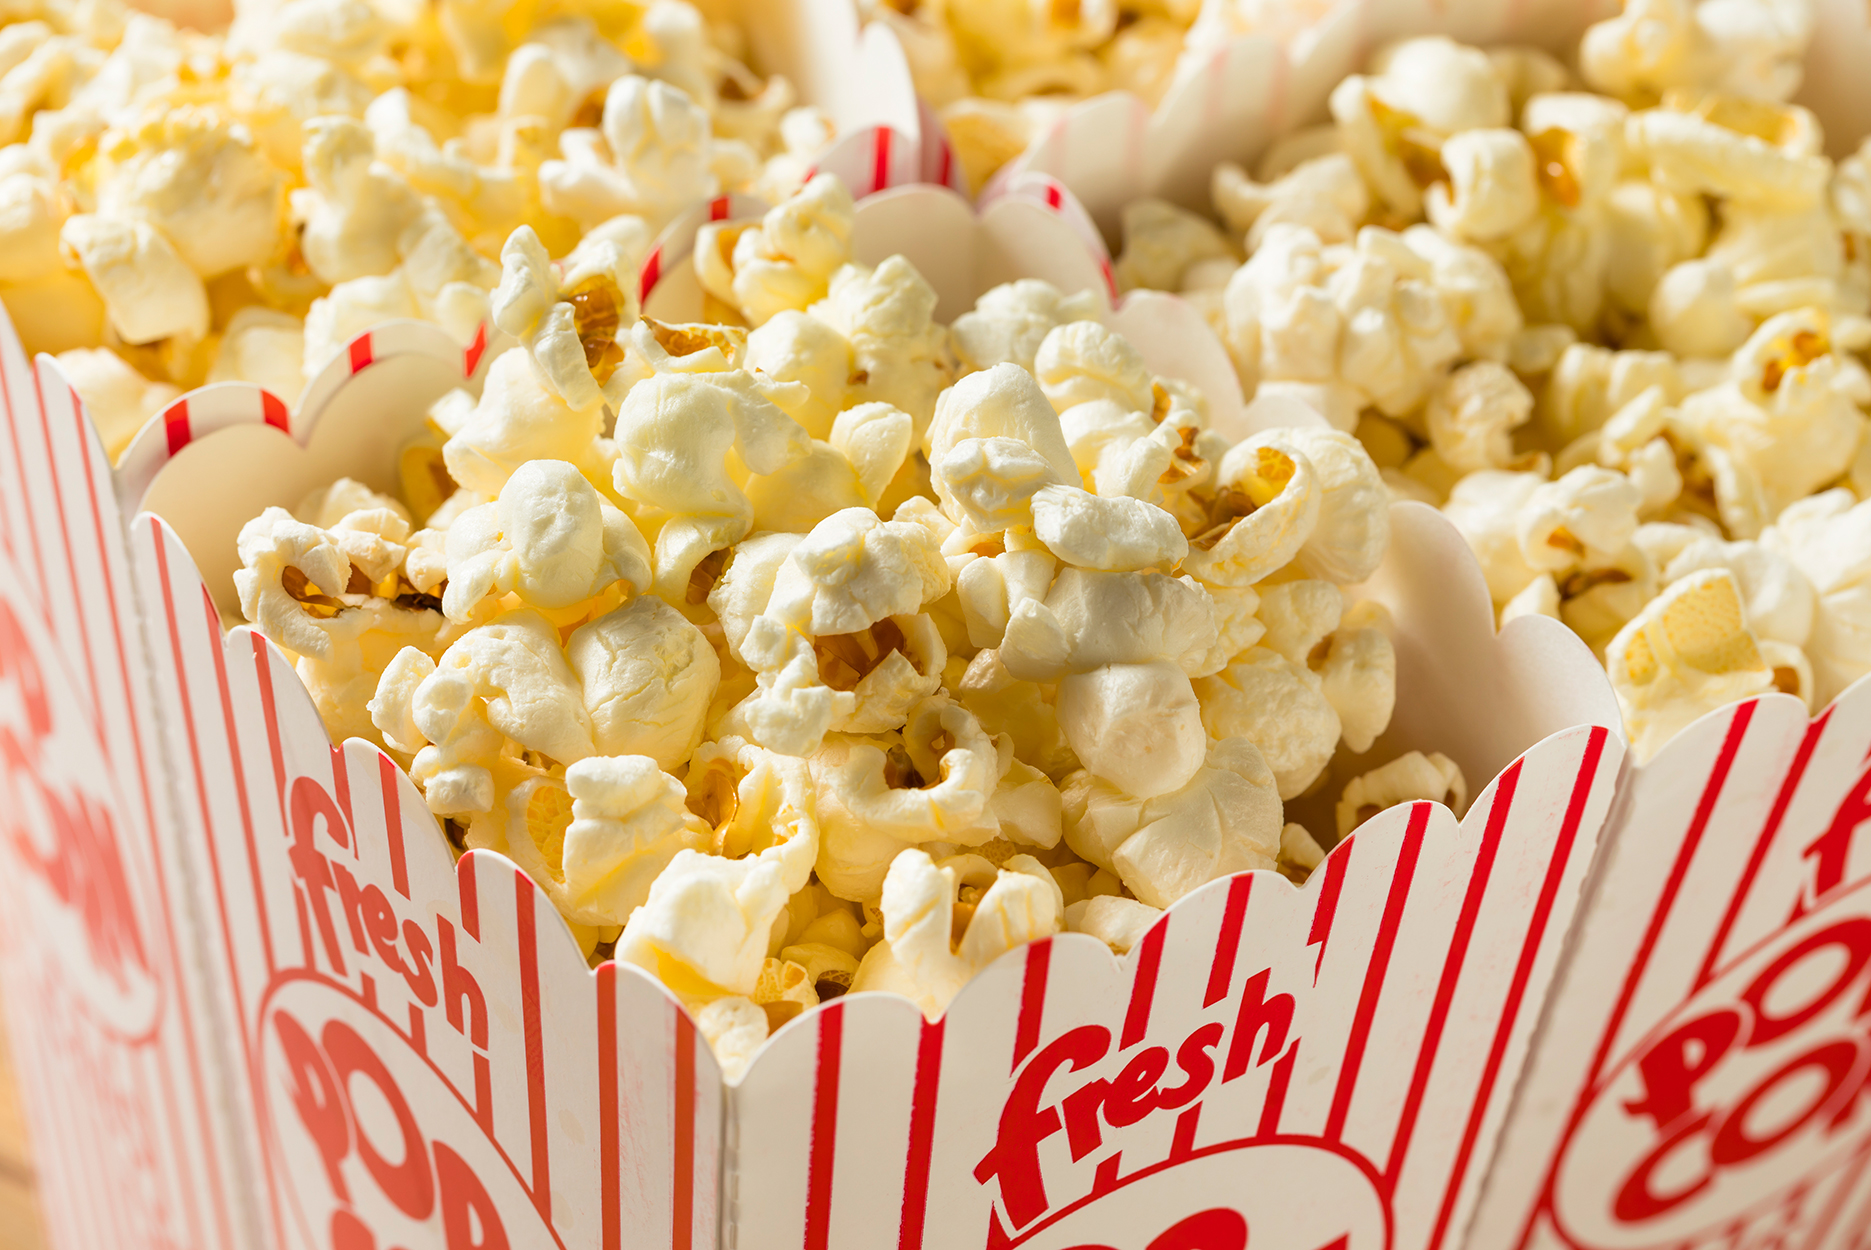 Movie Theaters Selling Popcorn and Snacks To-Go